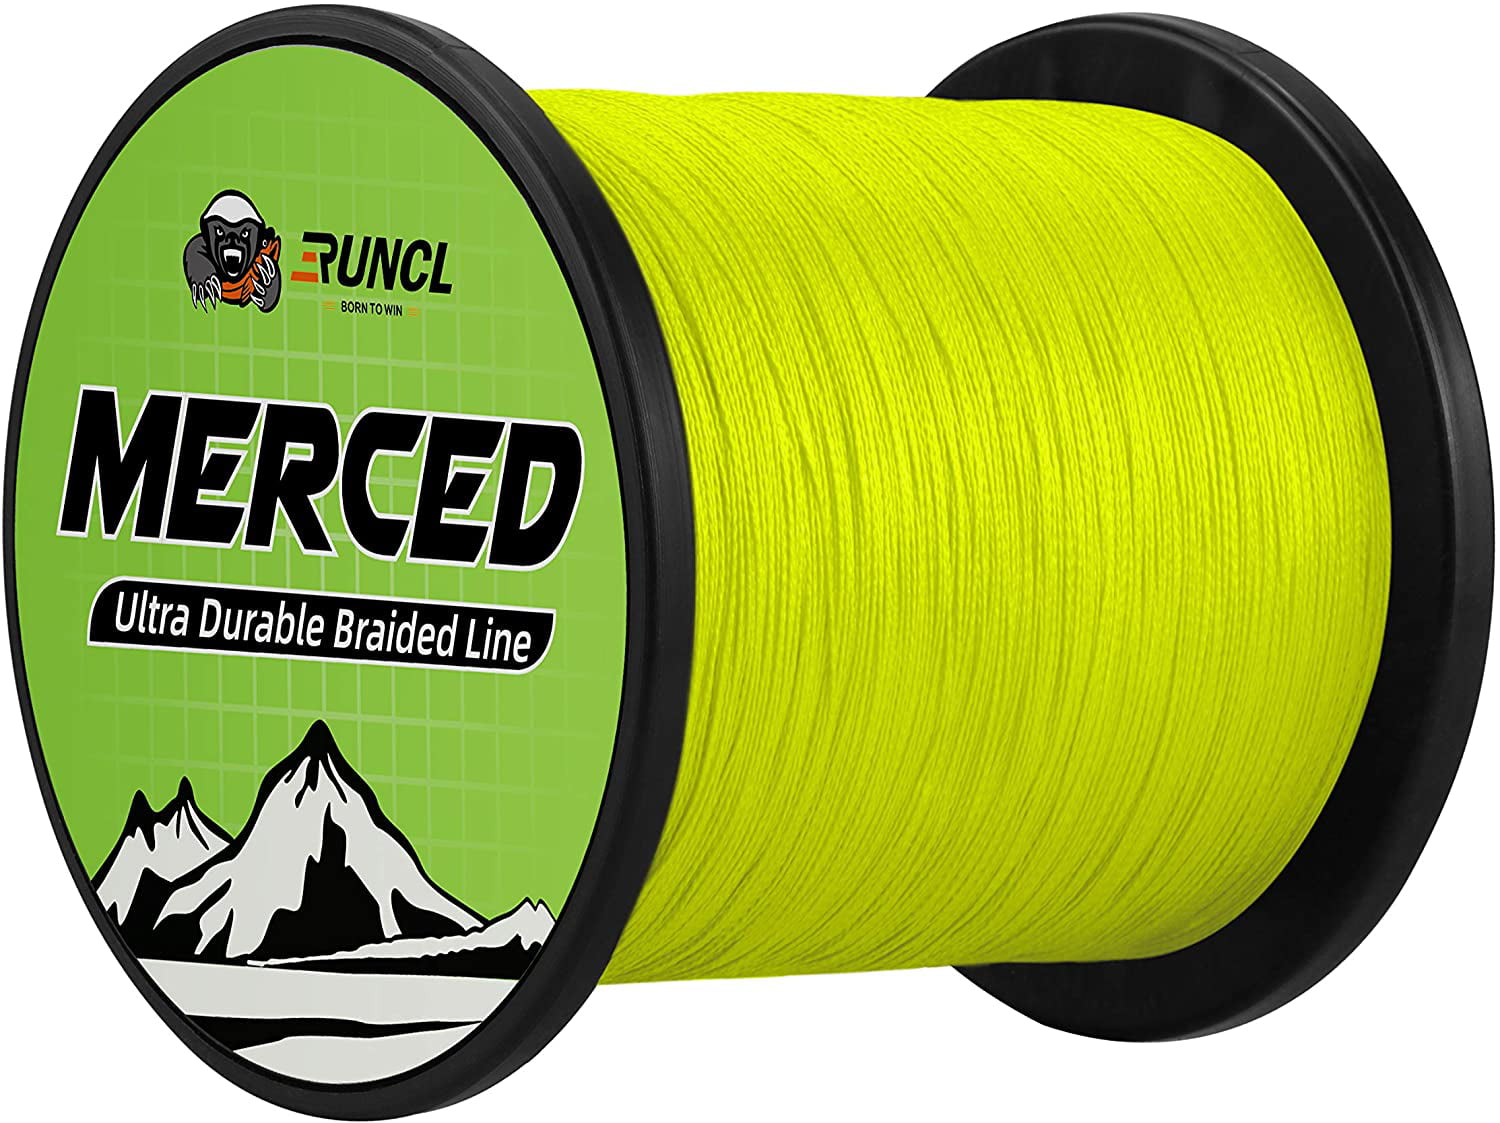 Stronger Smoother Thin-Coating Tech 1000 500 300 Yards Braided Line 4 8 Strands 6-200LB Fishing Line for Freshwater Saltwater… RUNCL Braided Fishing Line Merced Proprietary Weaving Tech 